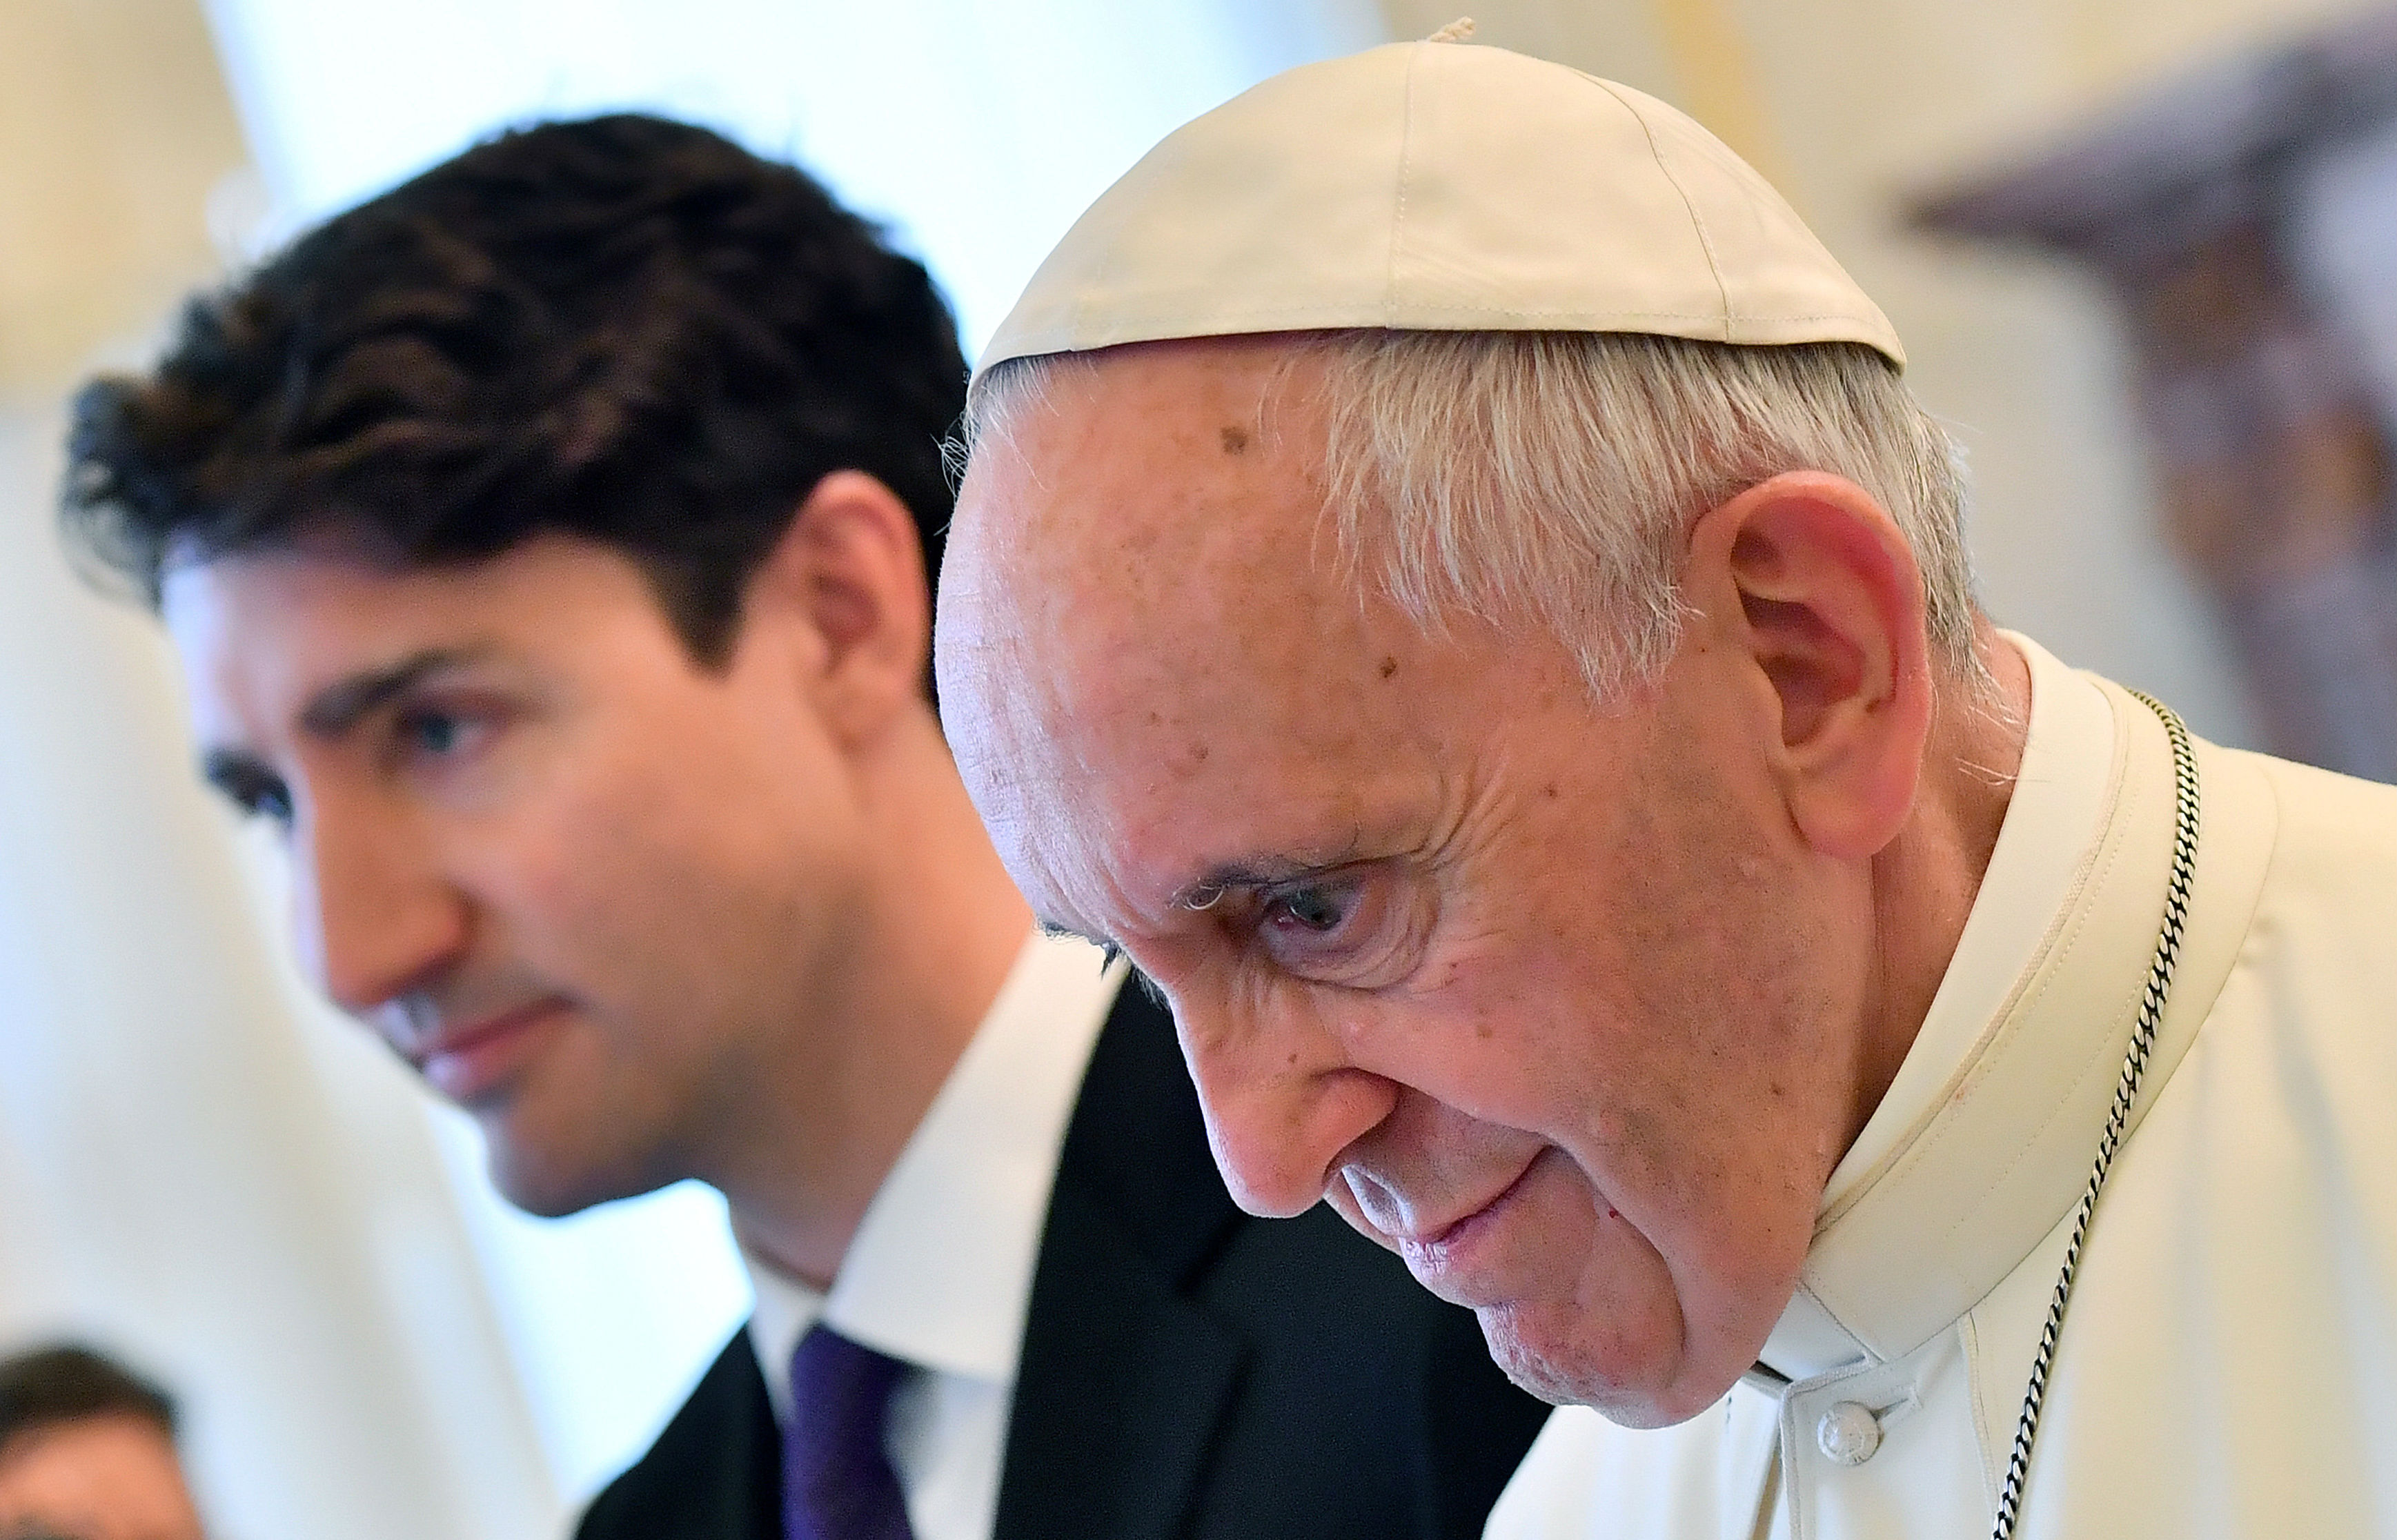 Pope refuses to be pressured as Trudeau pushes for an apology over Church's role in residential schools  